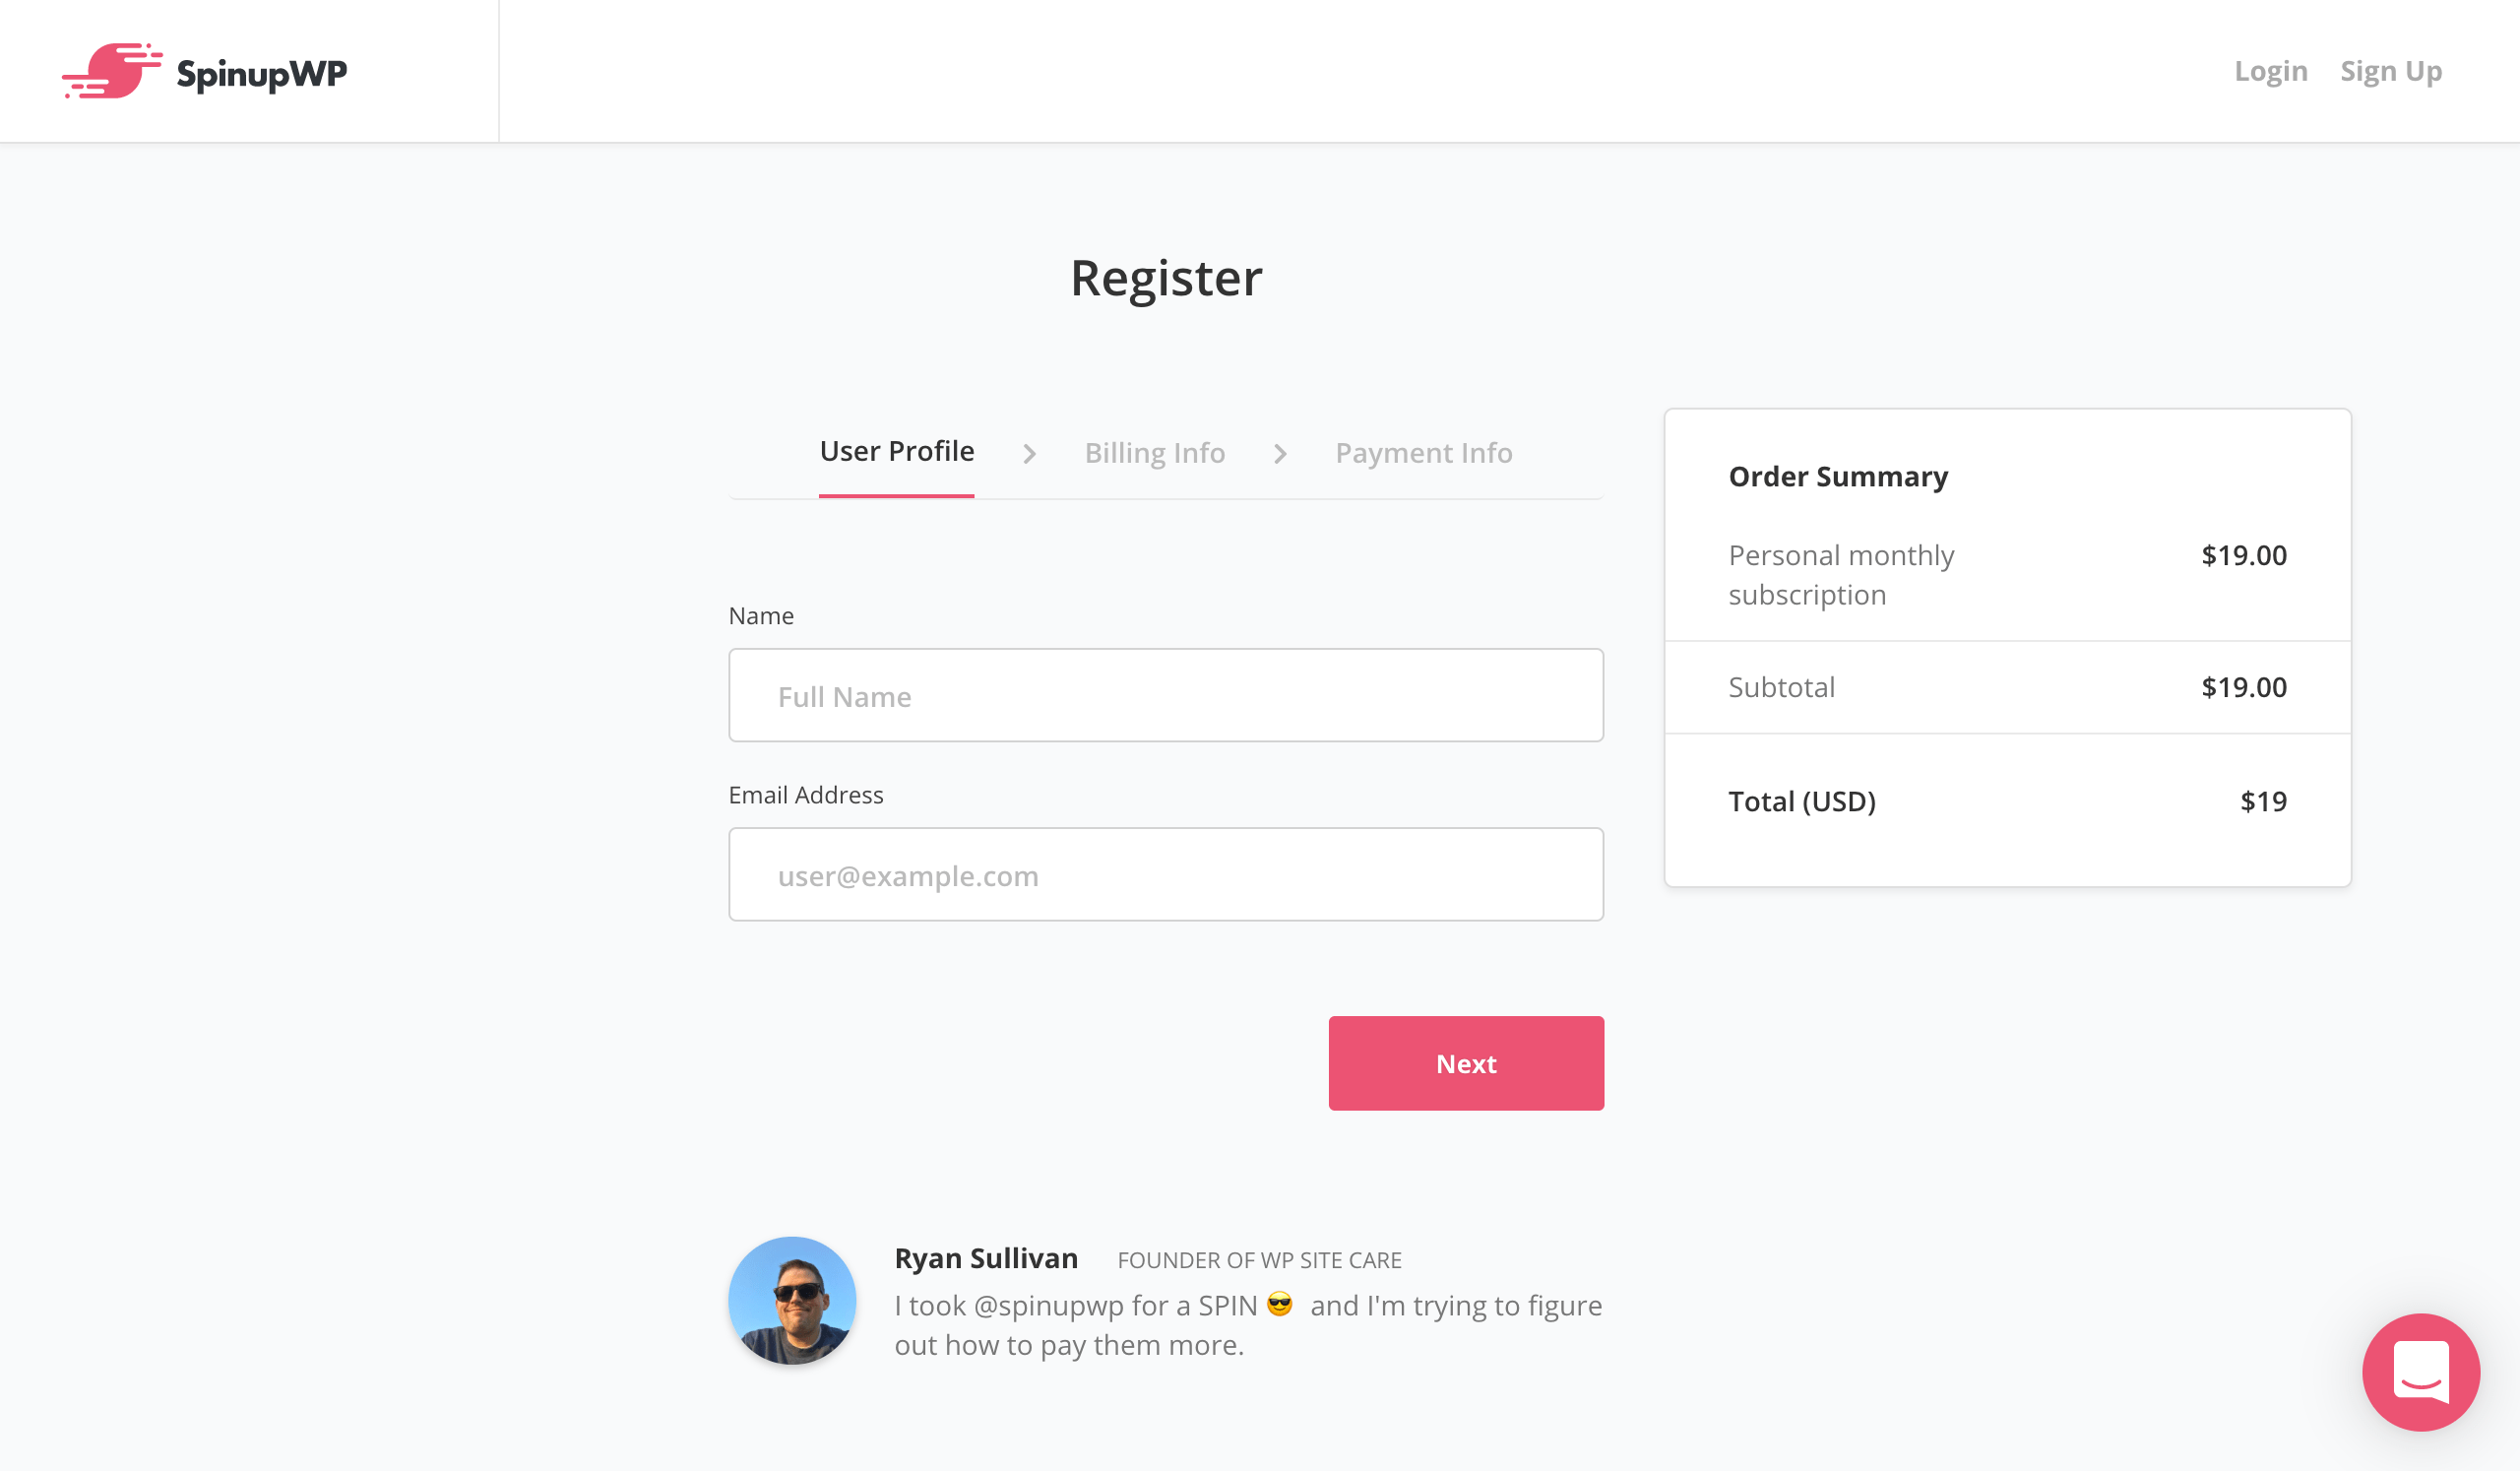 Registering with SpinupWP